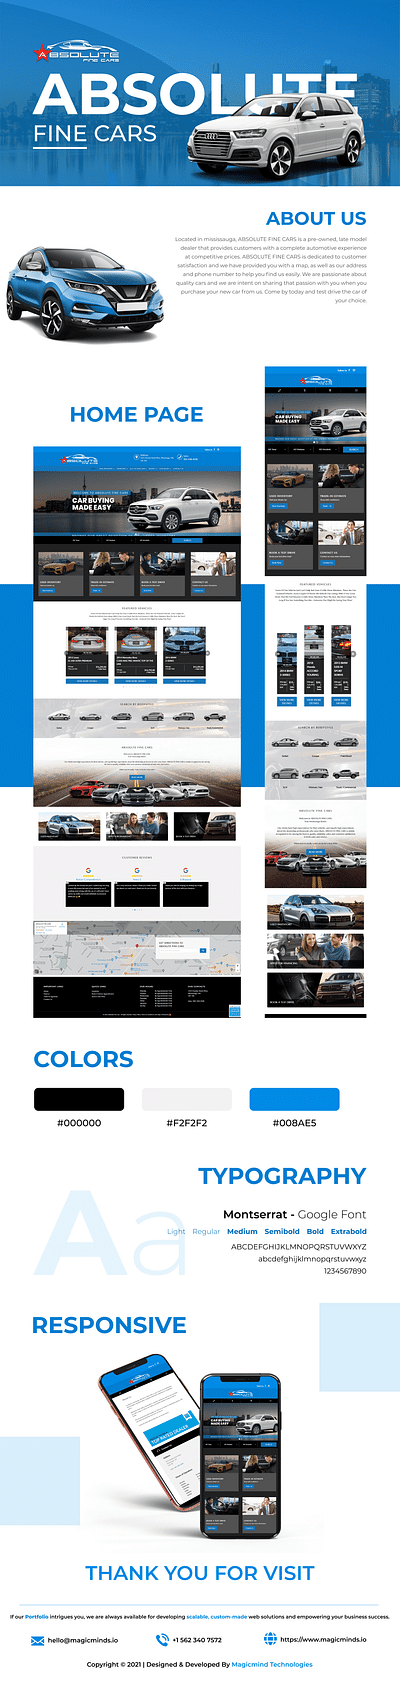 ABSOLUTE FINE CARS - Website Creation